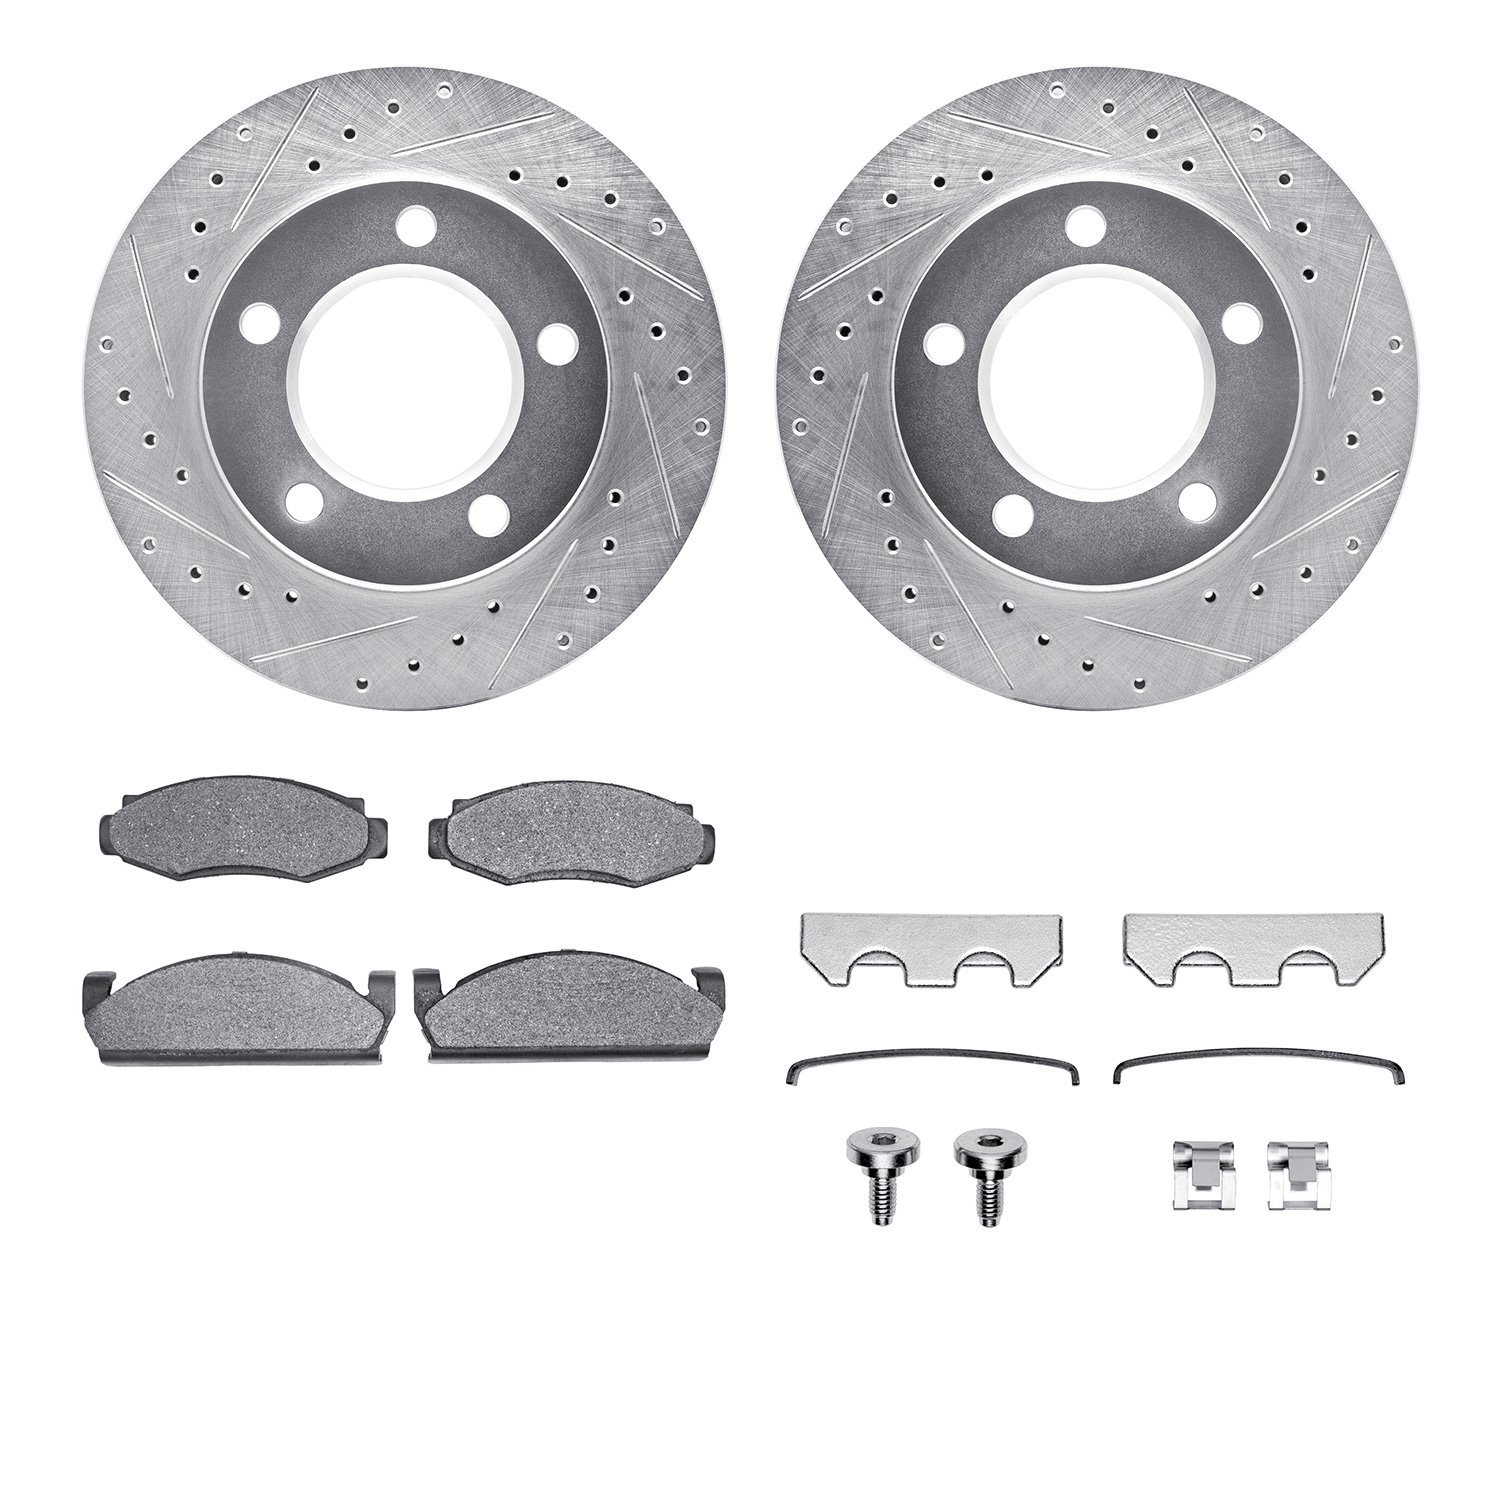 7412-42021 Drilled/Slotted Brake Rotors with Ultimate-Duty Brake Pads Kit & Hardware [Silver], 1978-1979 Mopar, Position: Front